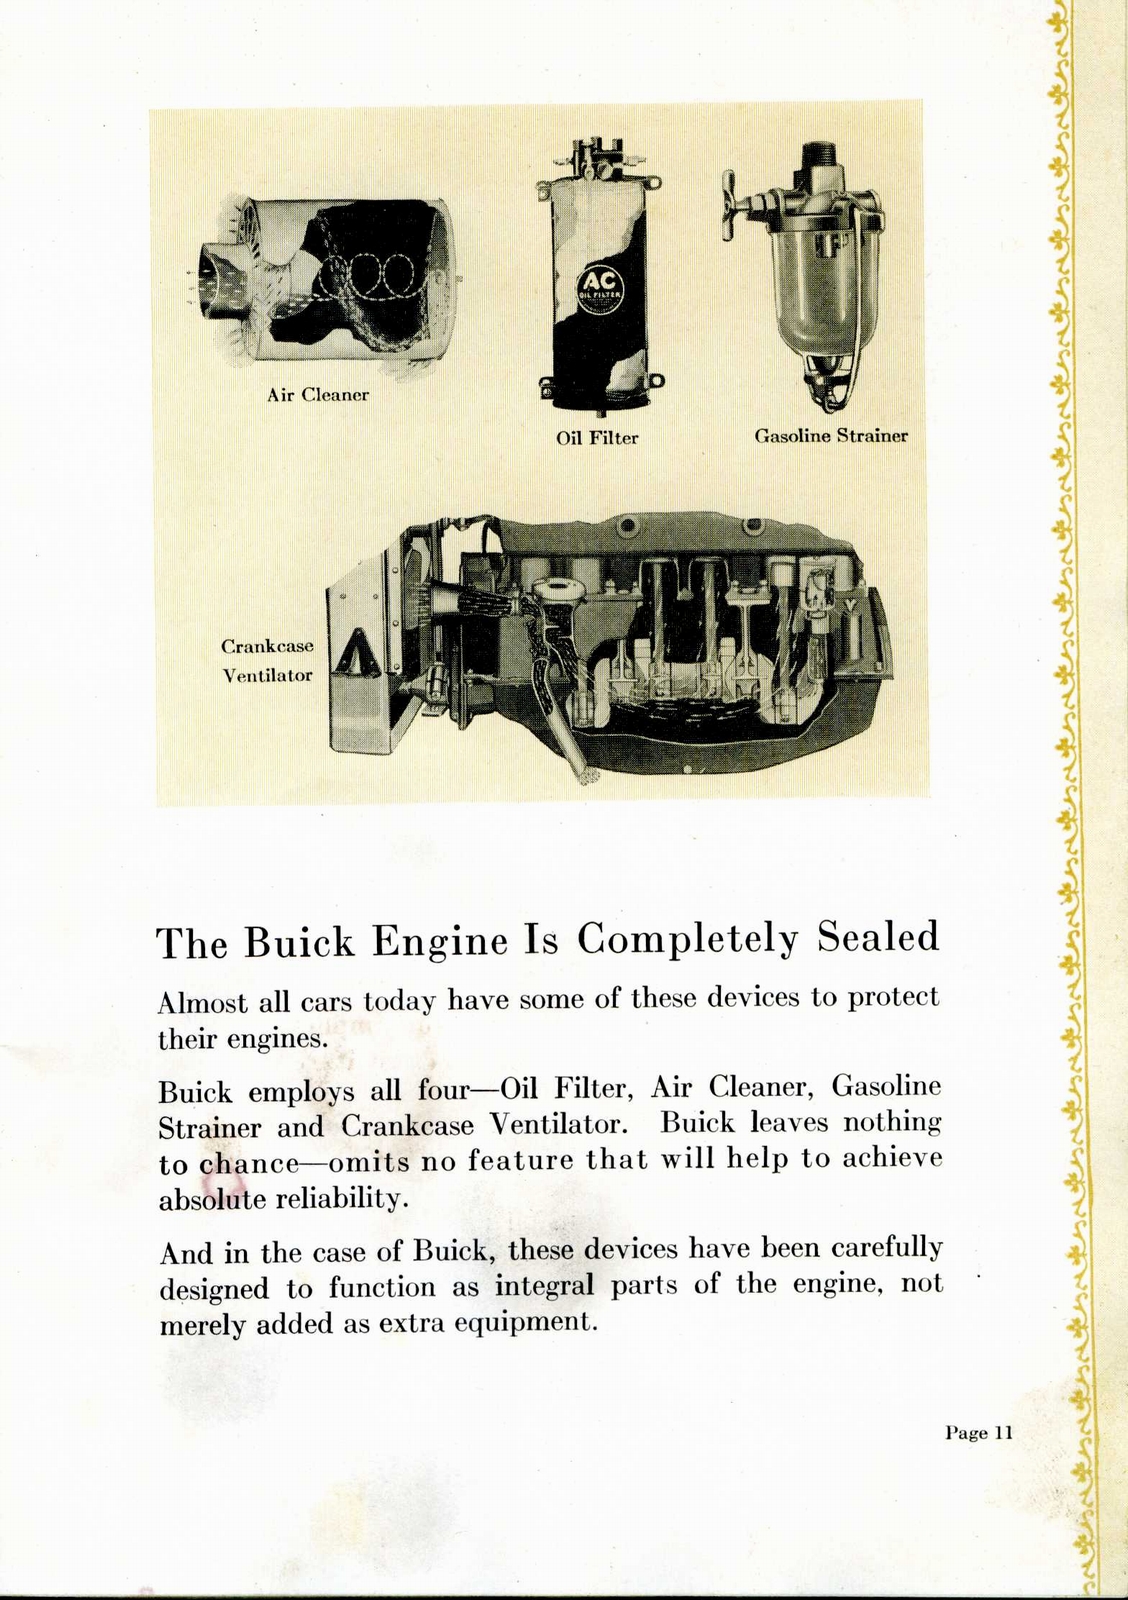 n_1928 Buick-How to Choose a Motor Car Wisely-11.jpg